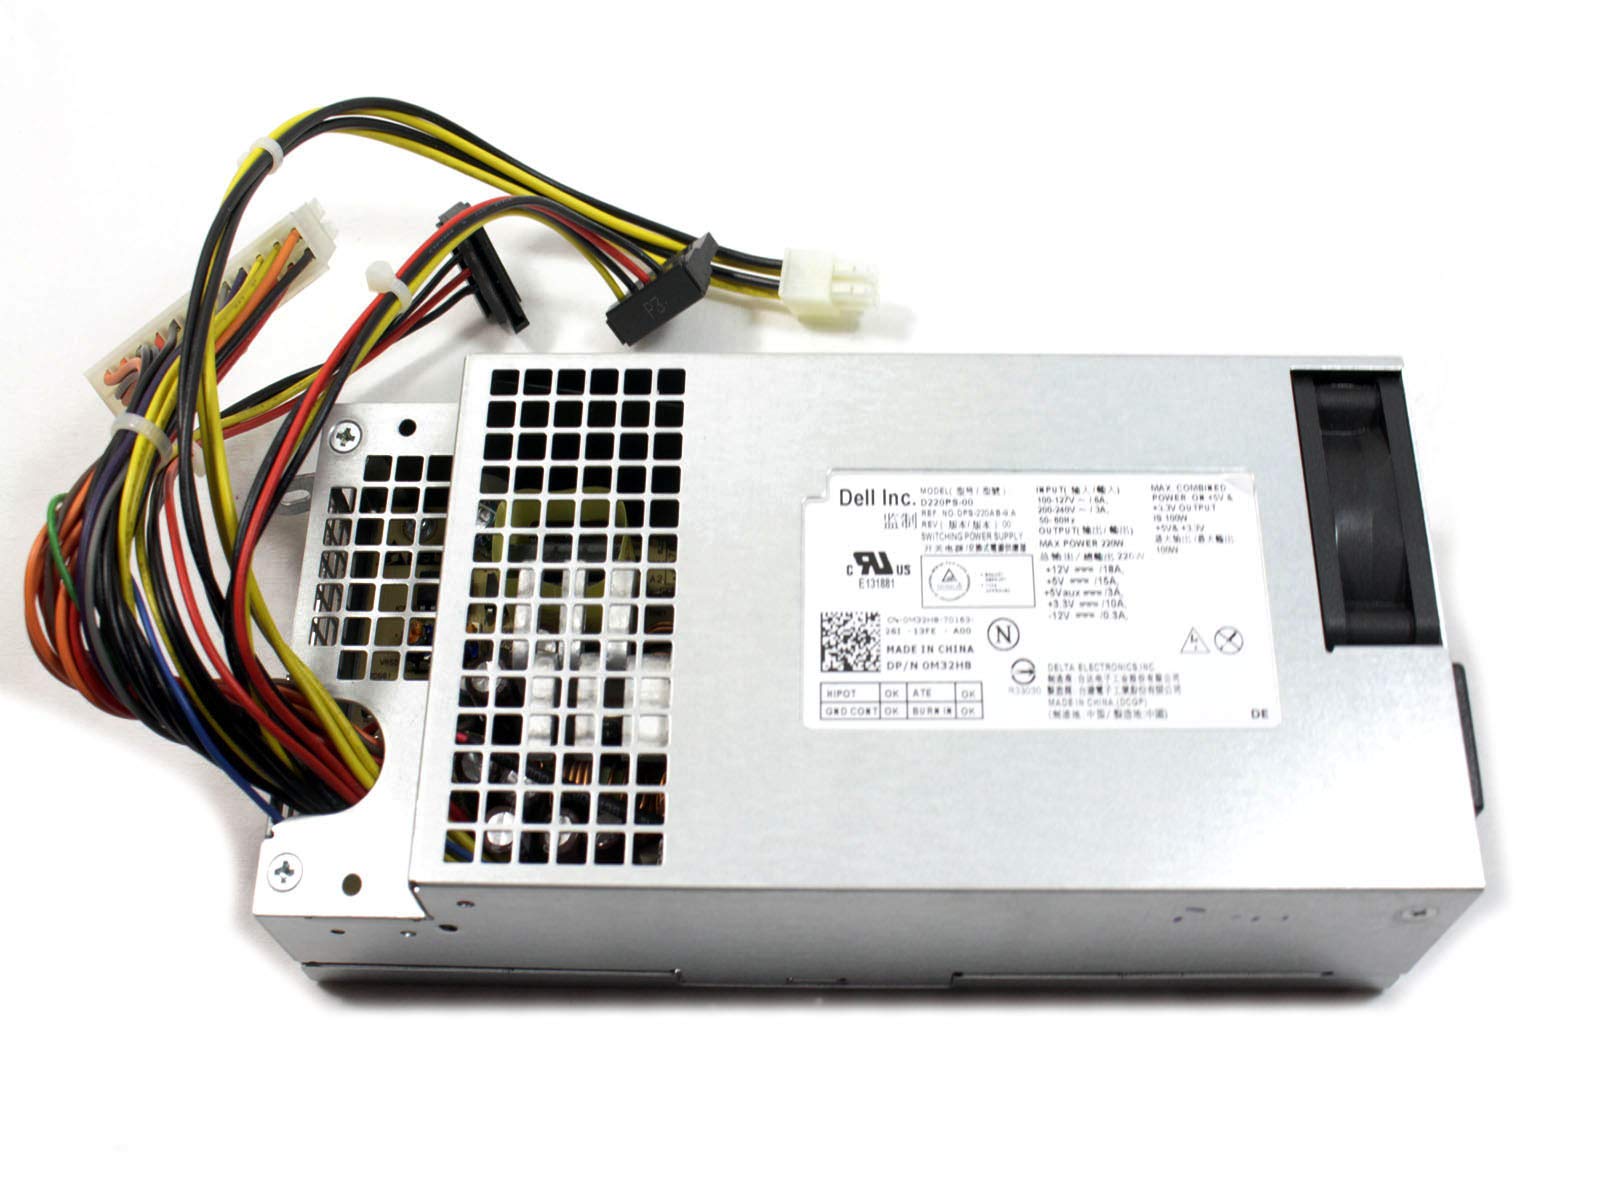 Power Supply for Dell Inspiron 660s 3647 Vostro 270s Small Form Factor Computer 220 Watt P3JW1 HU220NS-00 HK320-82FP